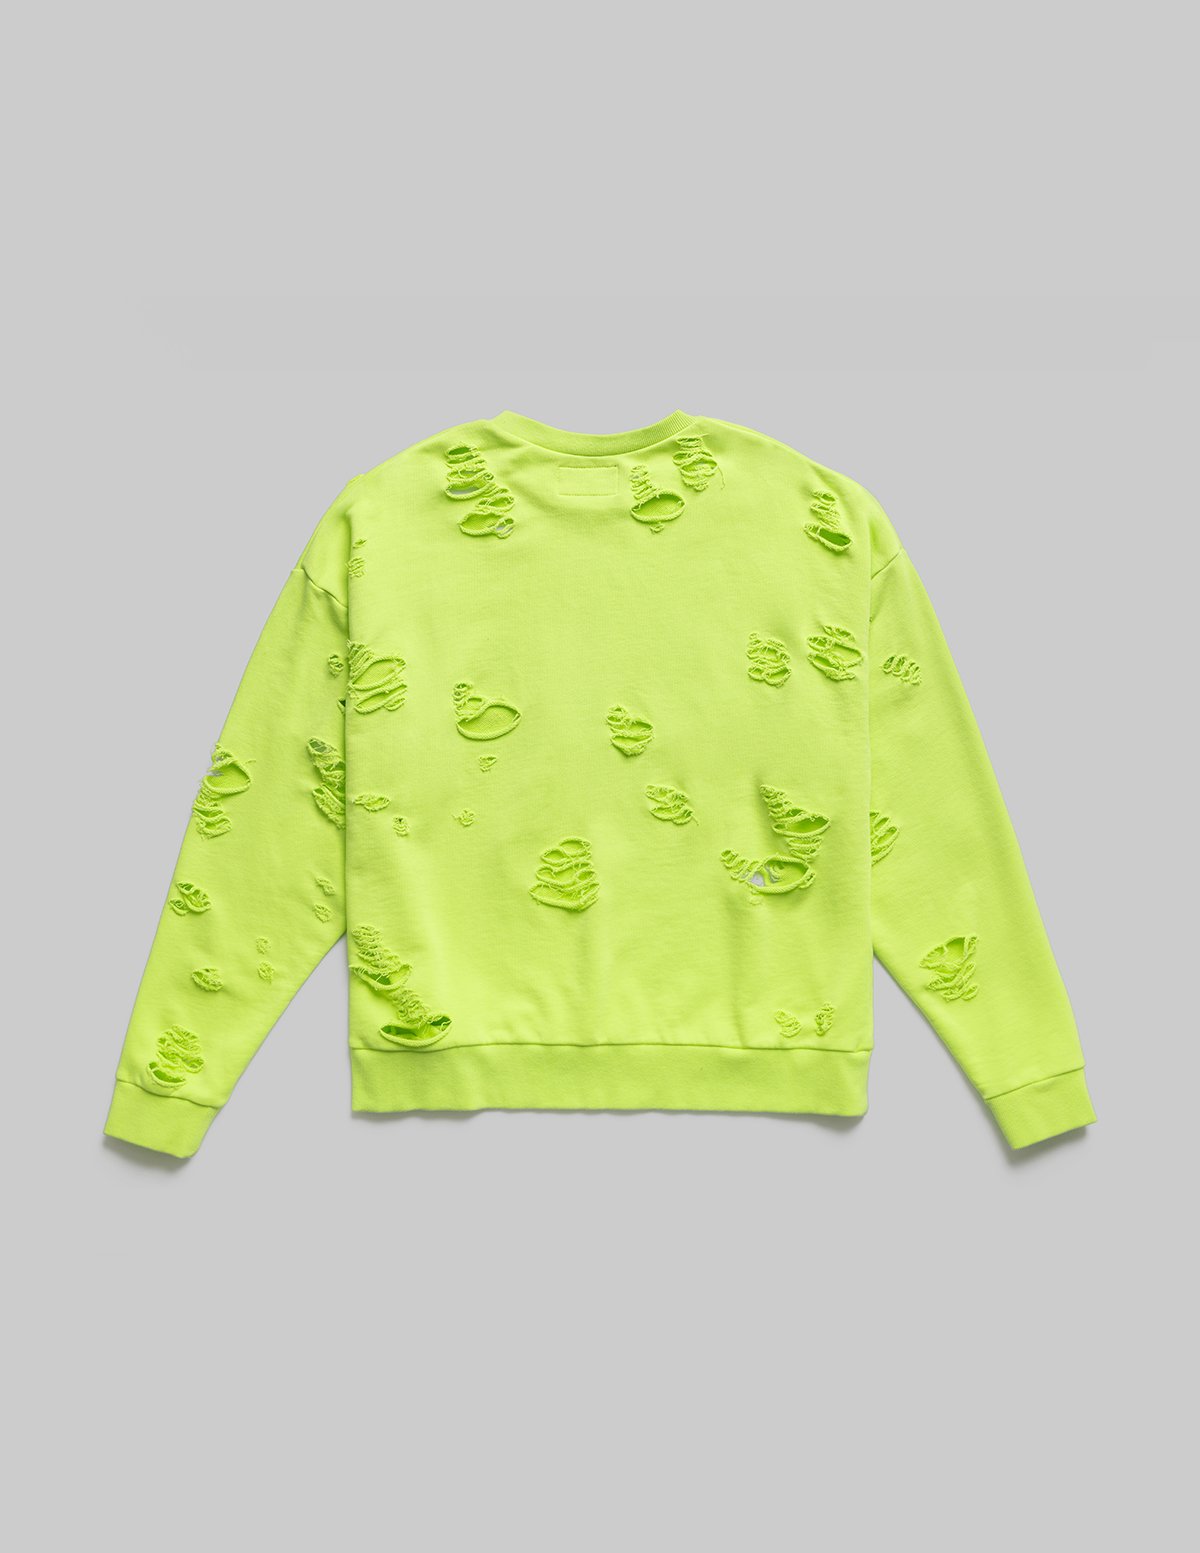 I AM NOT PERFECT TRASHED SWEATER - LIME